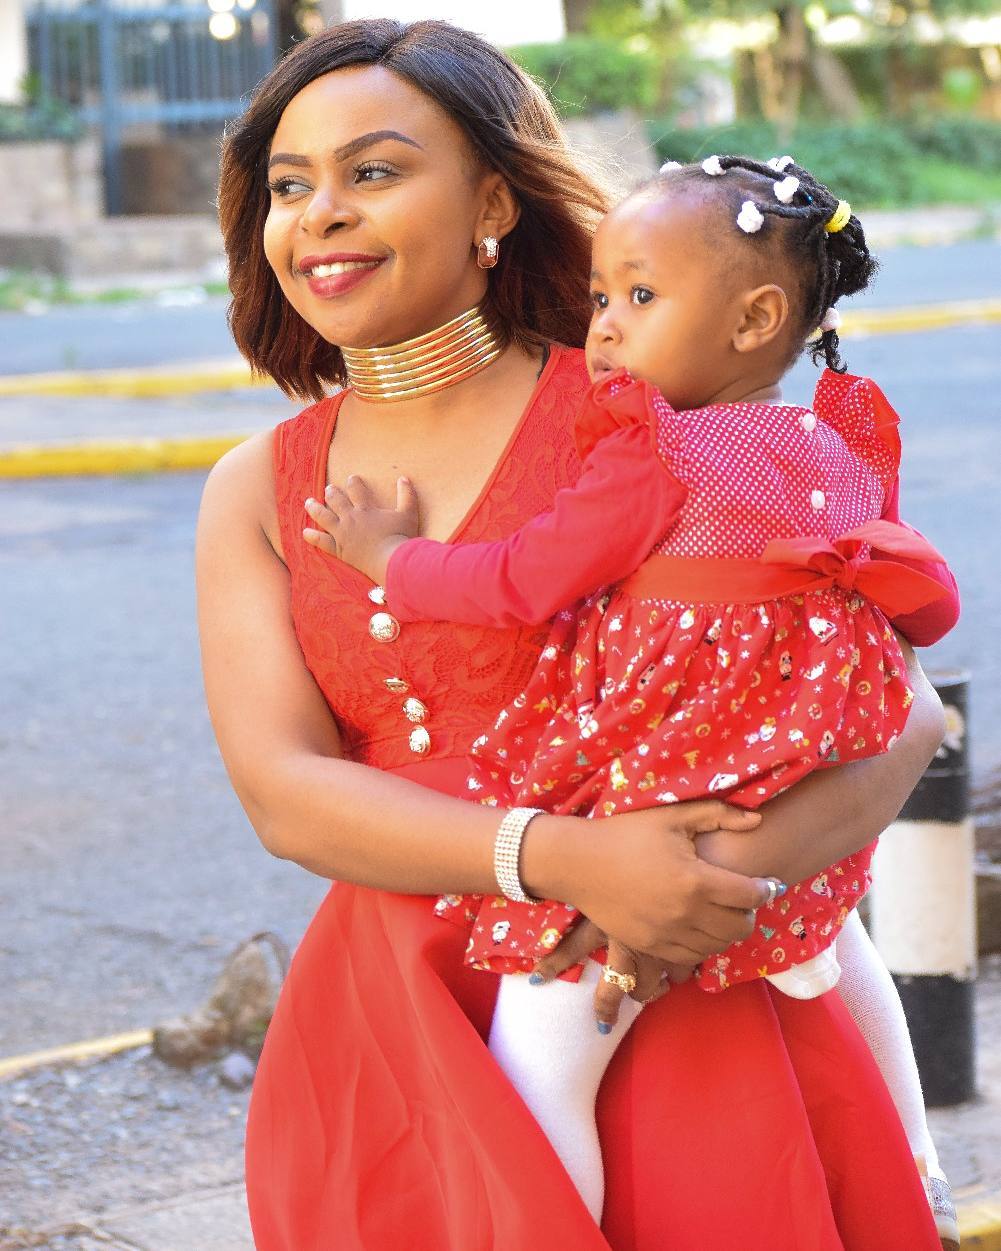 Singer Size 8 stuns with daughter in new beautiful photos, DJ Mo must feel lucky to have them in his life!